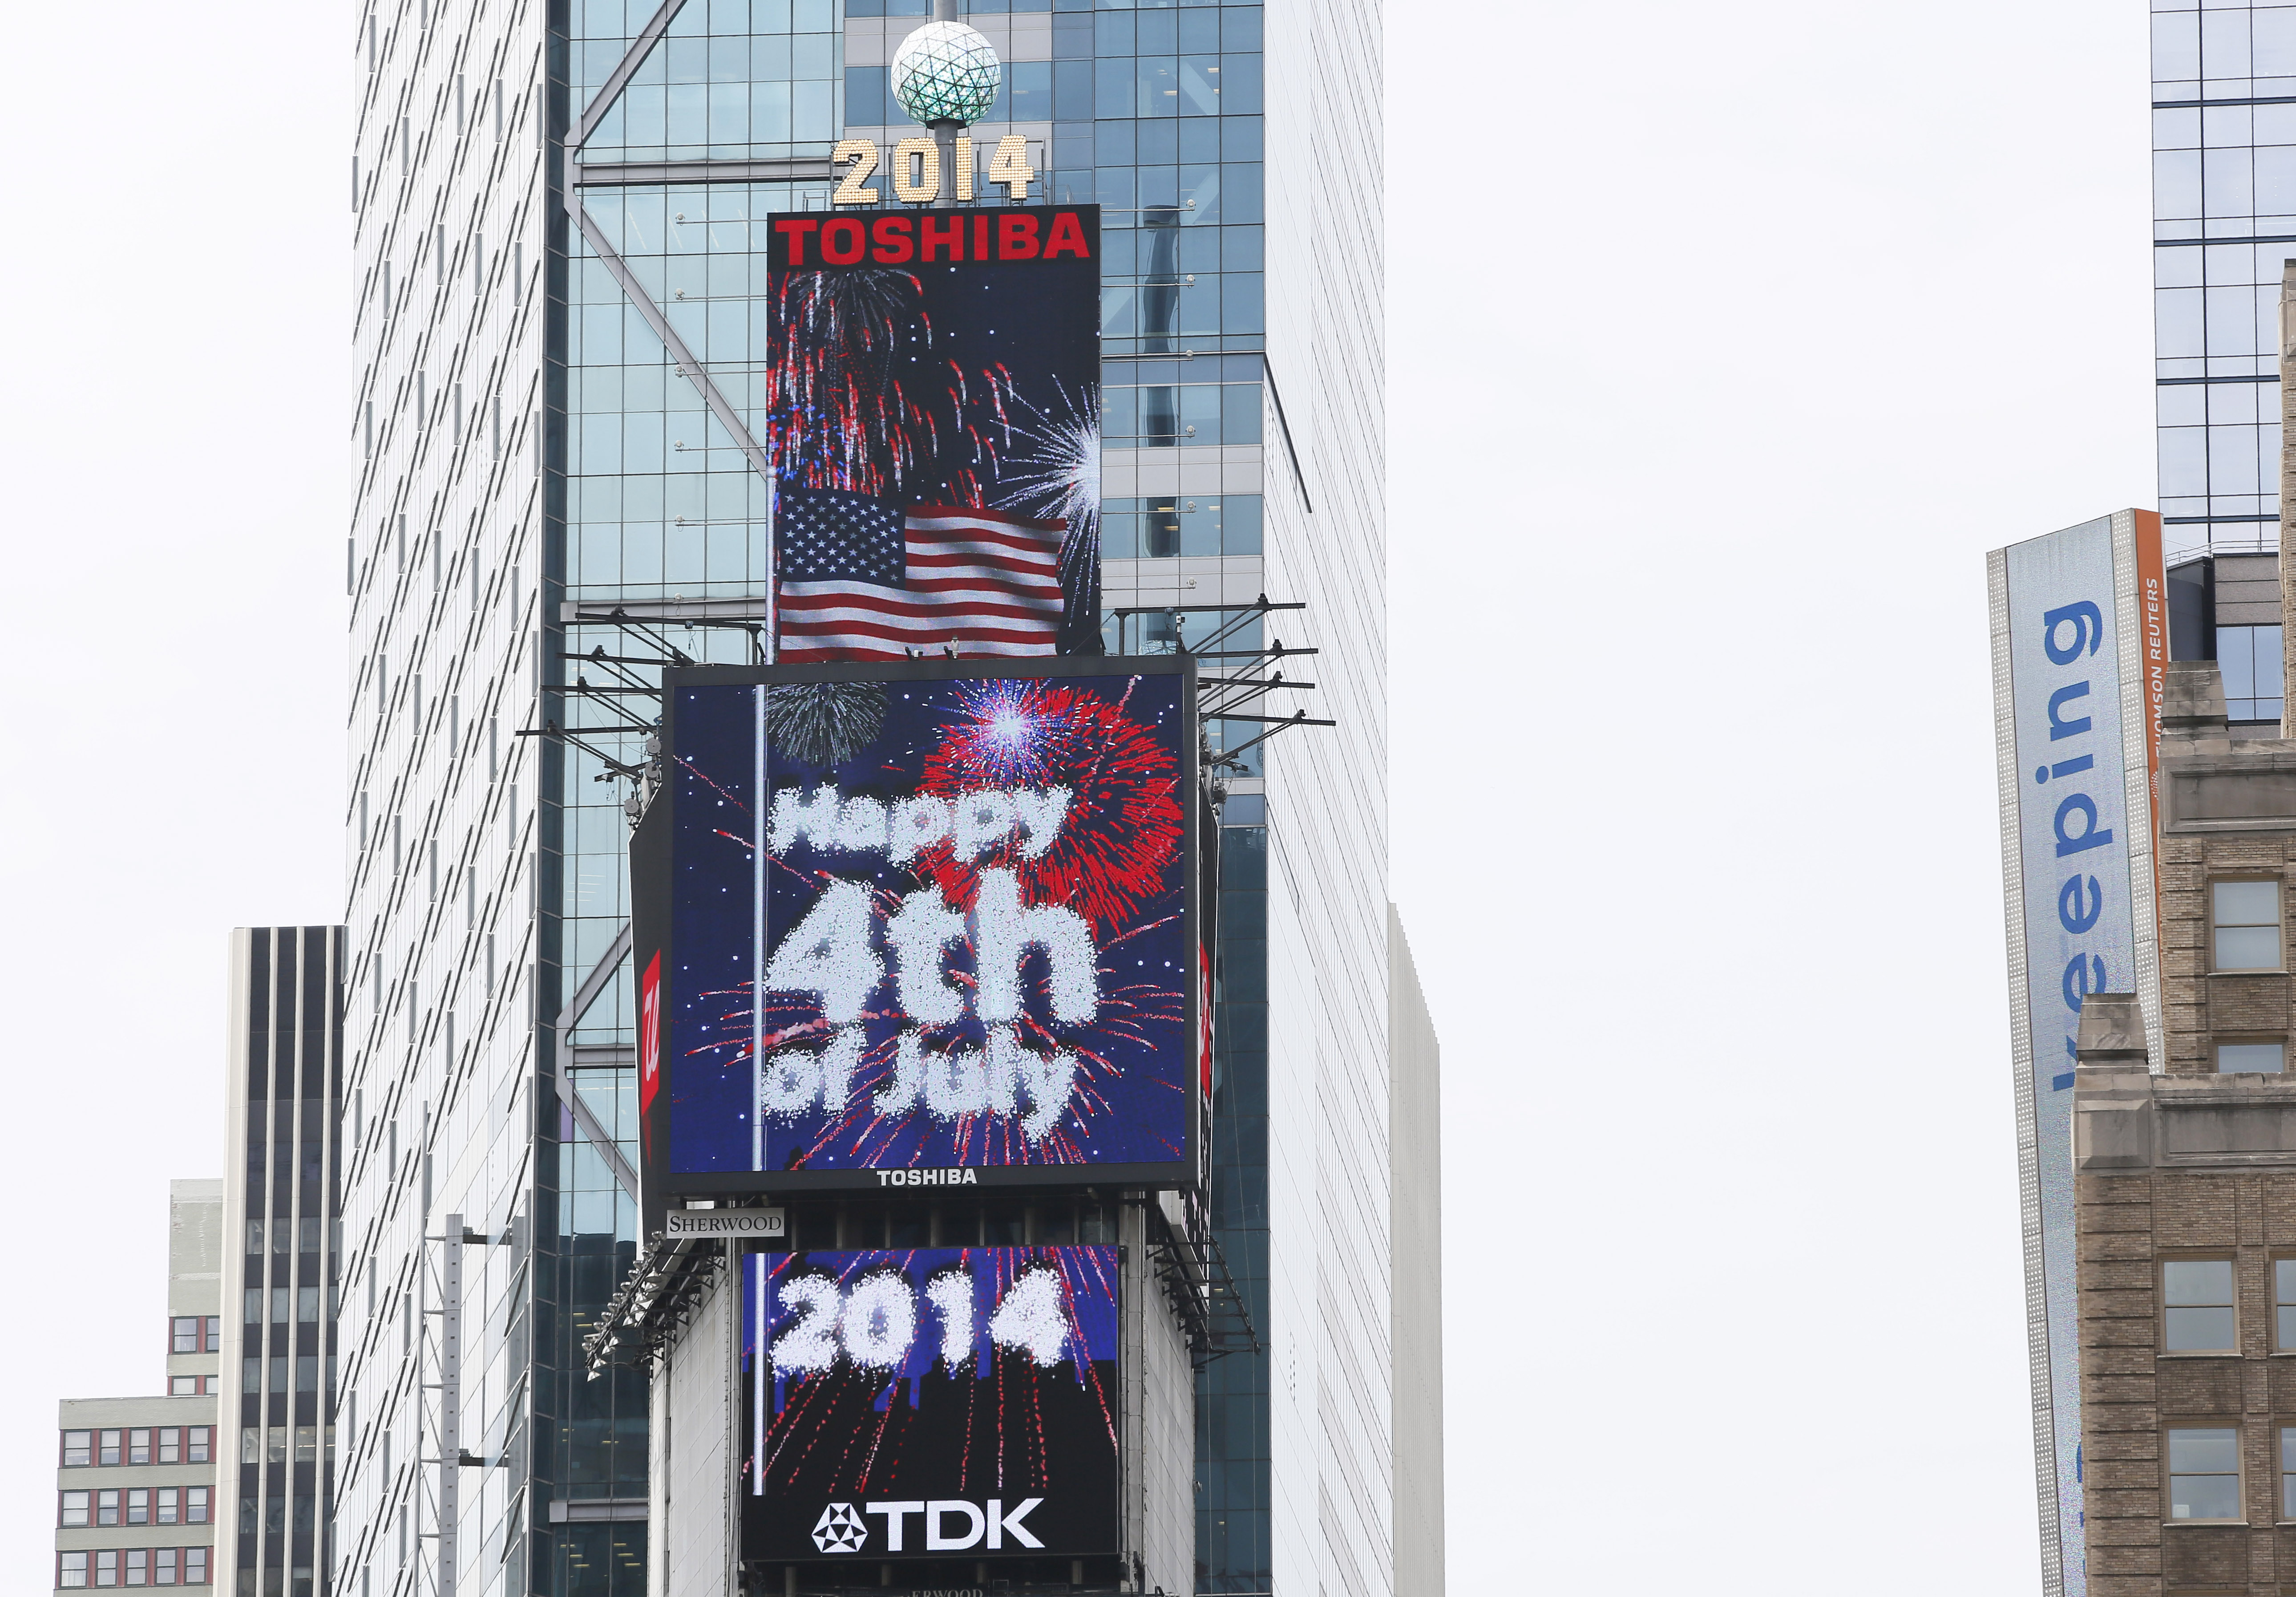 A patriotic tribute to the 4th of July lights up New York's Times Square, as a giant digitally-animated fireworks spectacular is featured on the Toshiba Vision and TDK Screens atop One Times Square, t